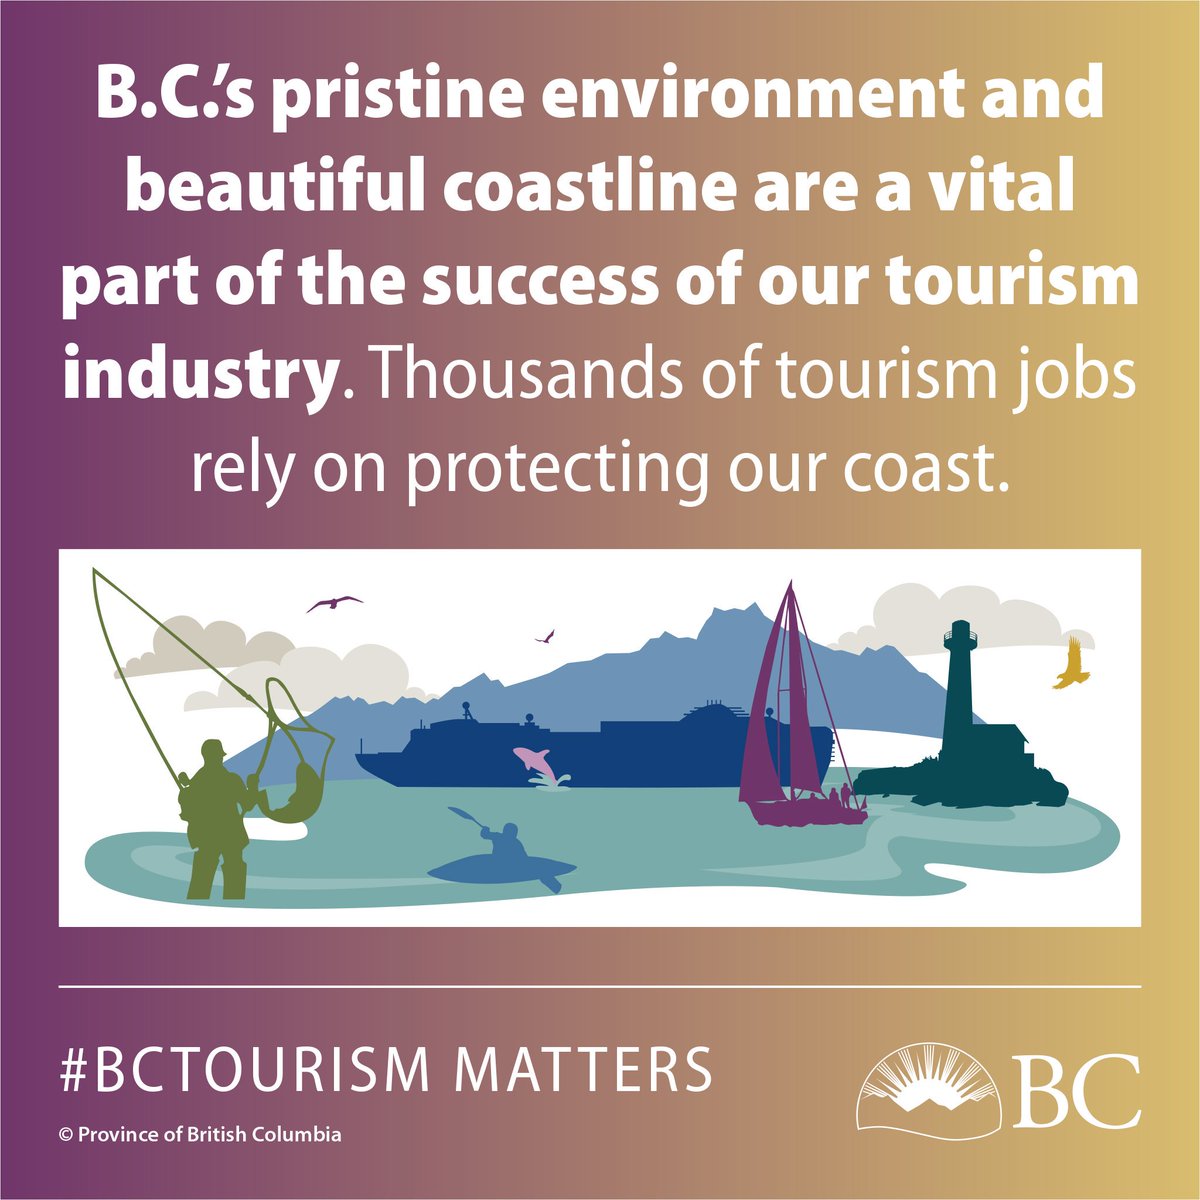 The coast is an important part of our tourism sector. 💕🐾🐻
#BCTourismMatters #bctourismweek